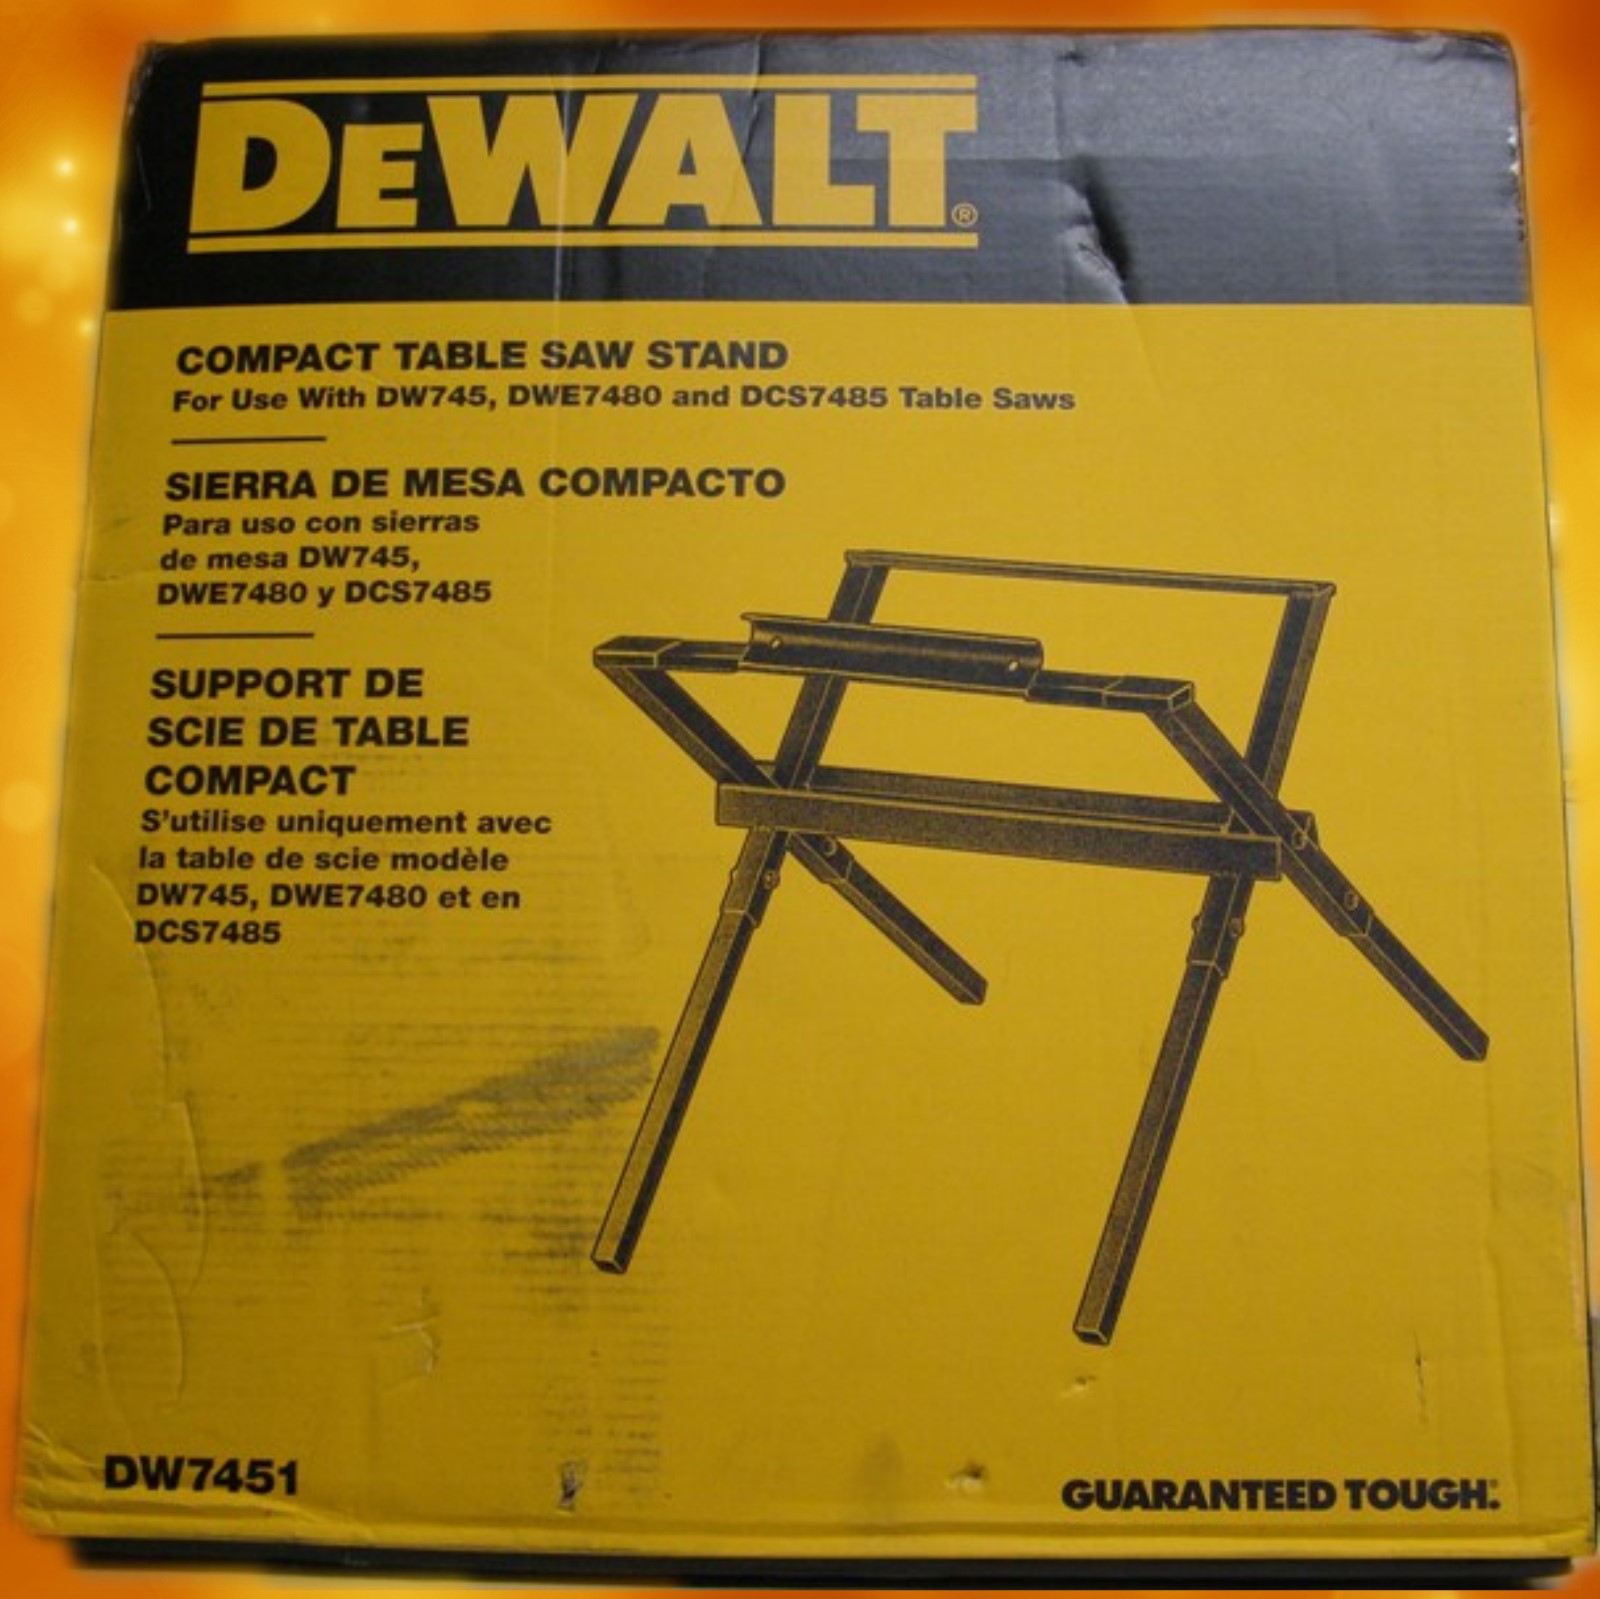 DeWalt DW7451 Portable Table Saw Stand for DW745, DWE7480,and DCS7485 Table Saws (Floor Model)
DW7451U